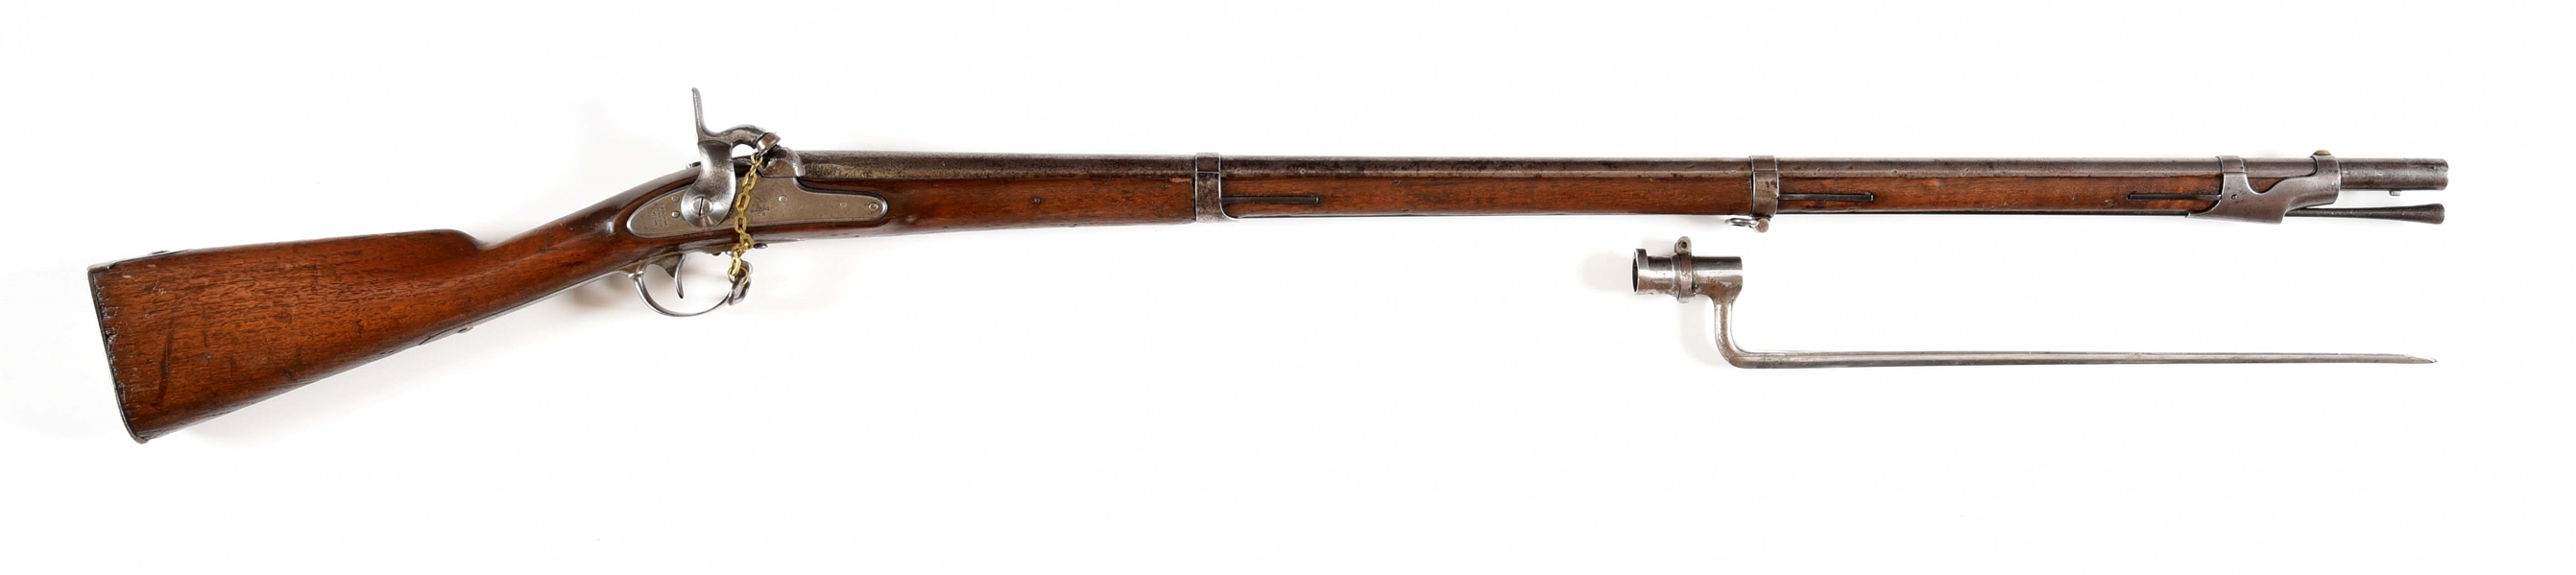 (A) SPRINGFIELD MODEL 1842 PERCUSSION SMOOTH BORE MUSKET.